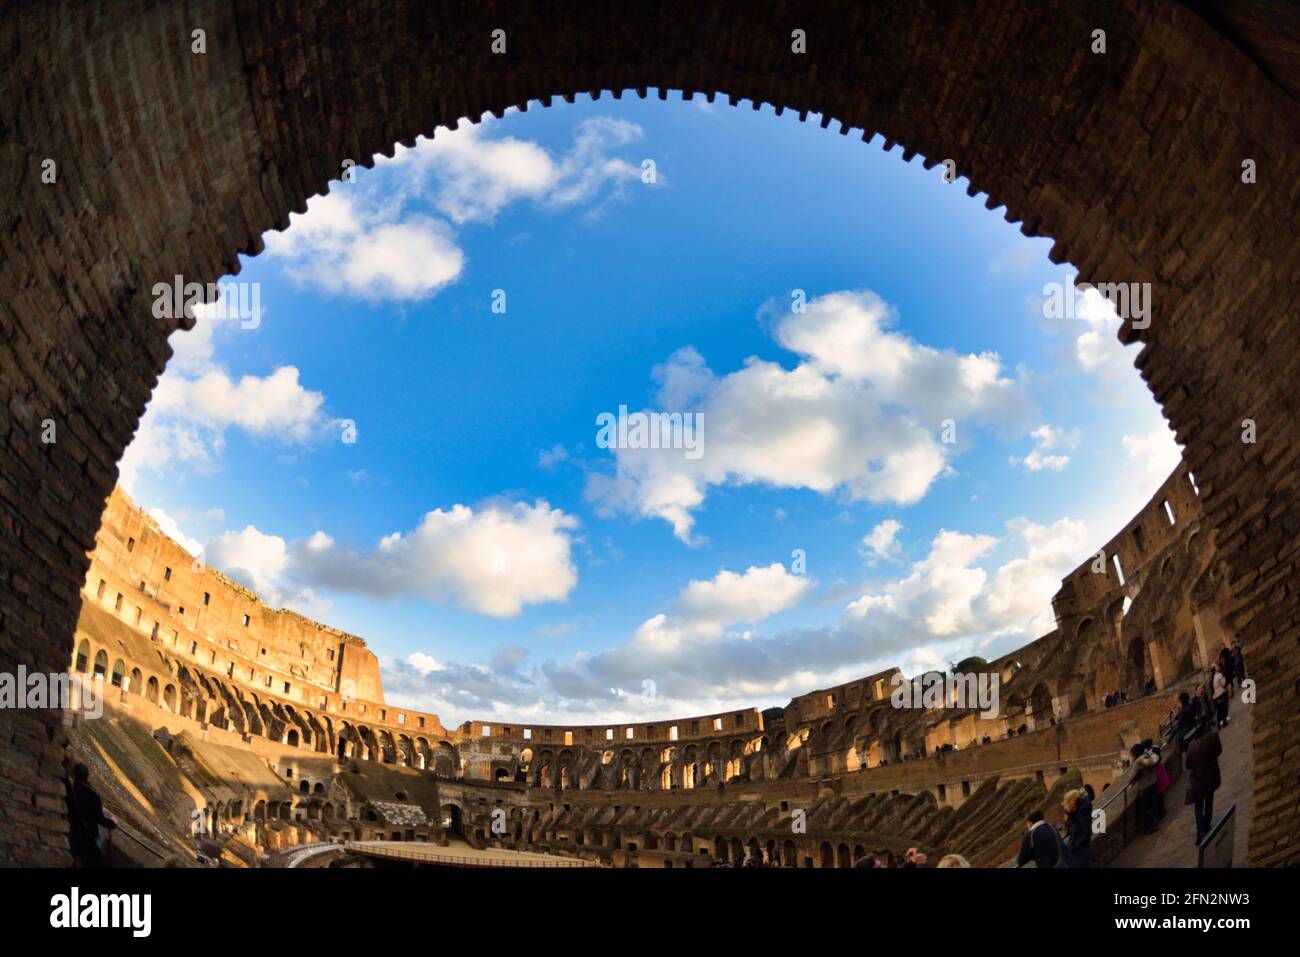 The Colosseum  - Colosseo - where the gladiators fought, one of the most famous monuments and buildings and sights of ancient Rome Stock Photo